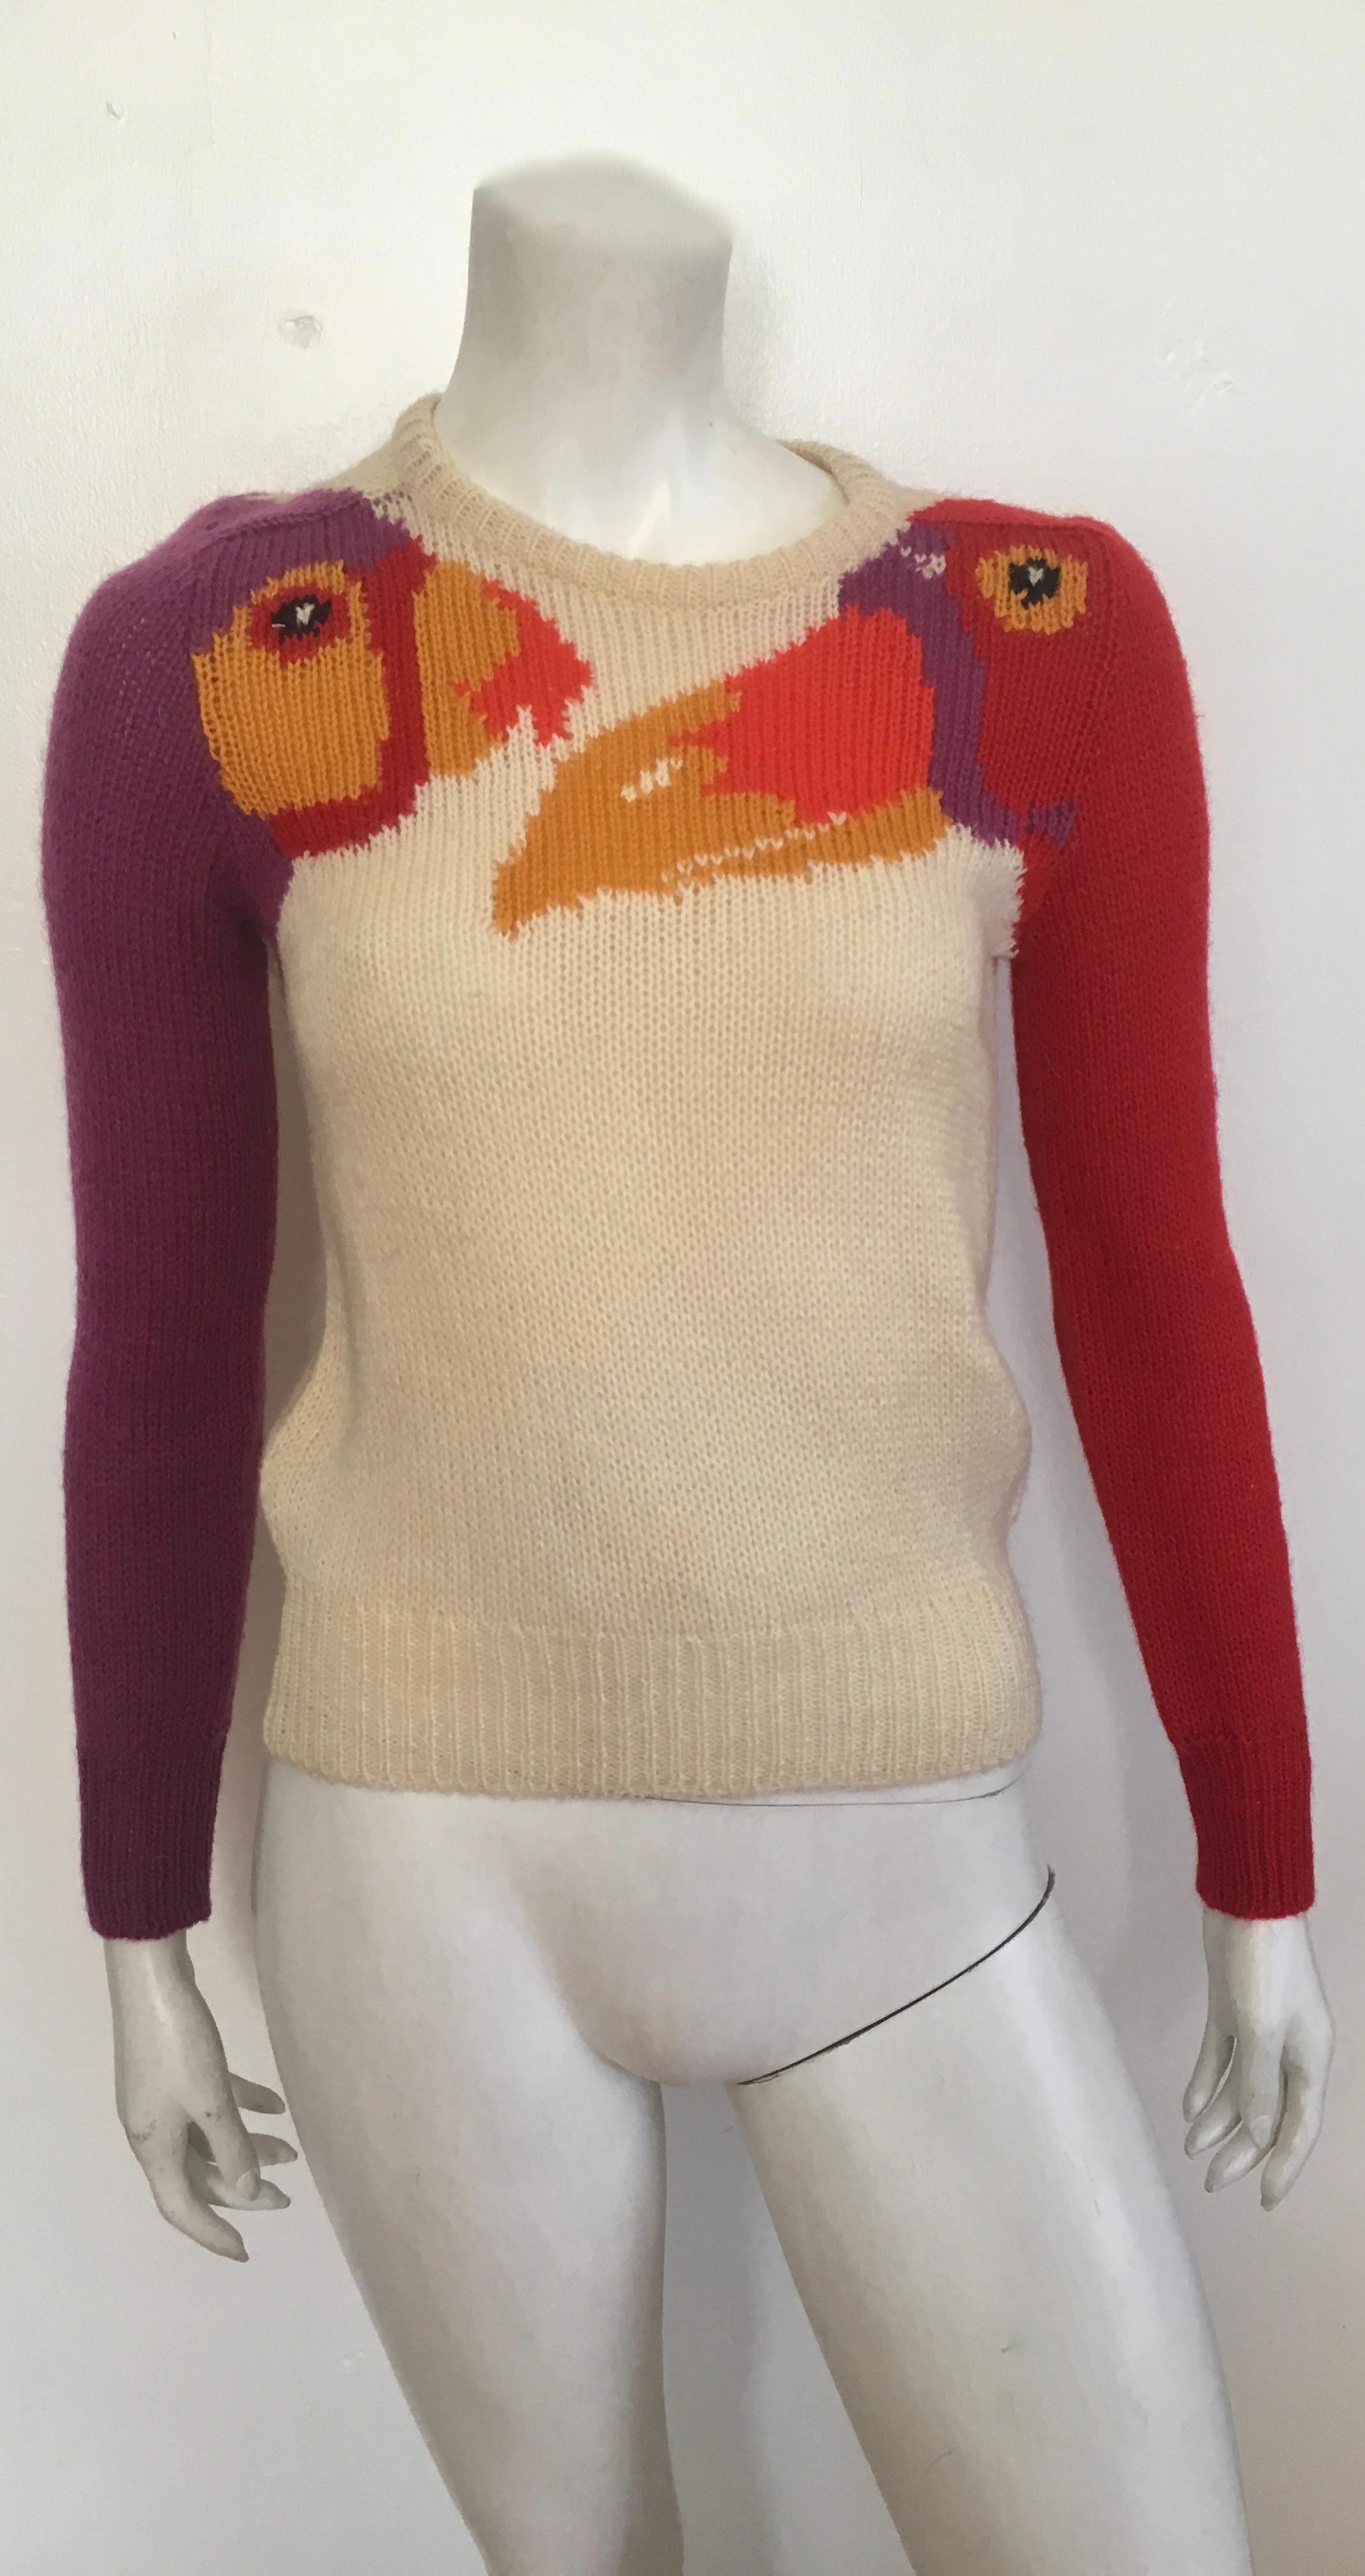 Krizia Maglia 1980s two exotic birds hand knit pullover sweater is an Italian size 38 and fits like a small, size 2 & 4.  These iconic sweaters were designed by Mariuccia Mandelli.  The Krizia Atelier was across the street from the Milan Zoo so I